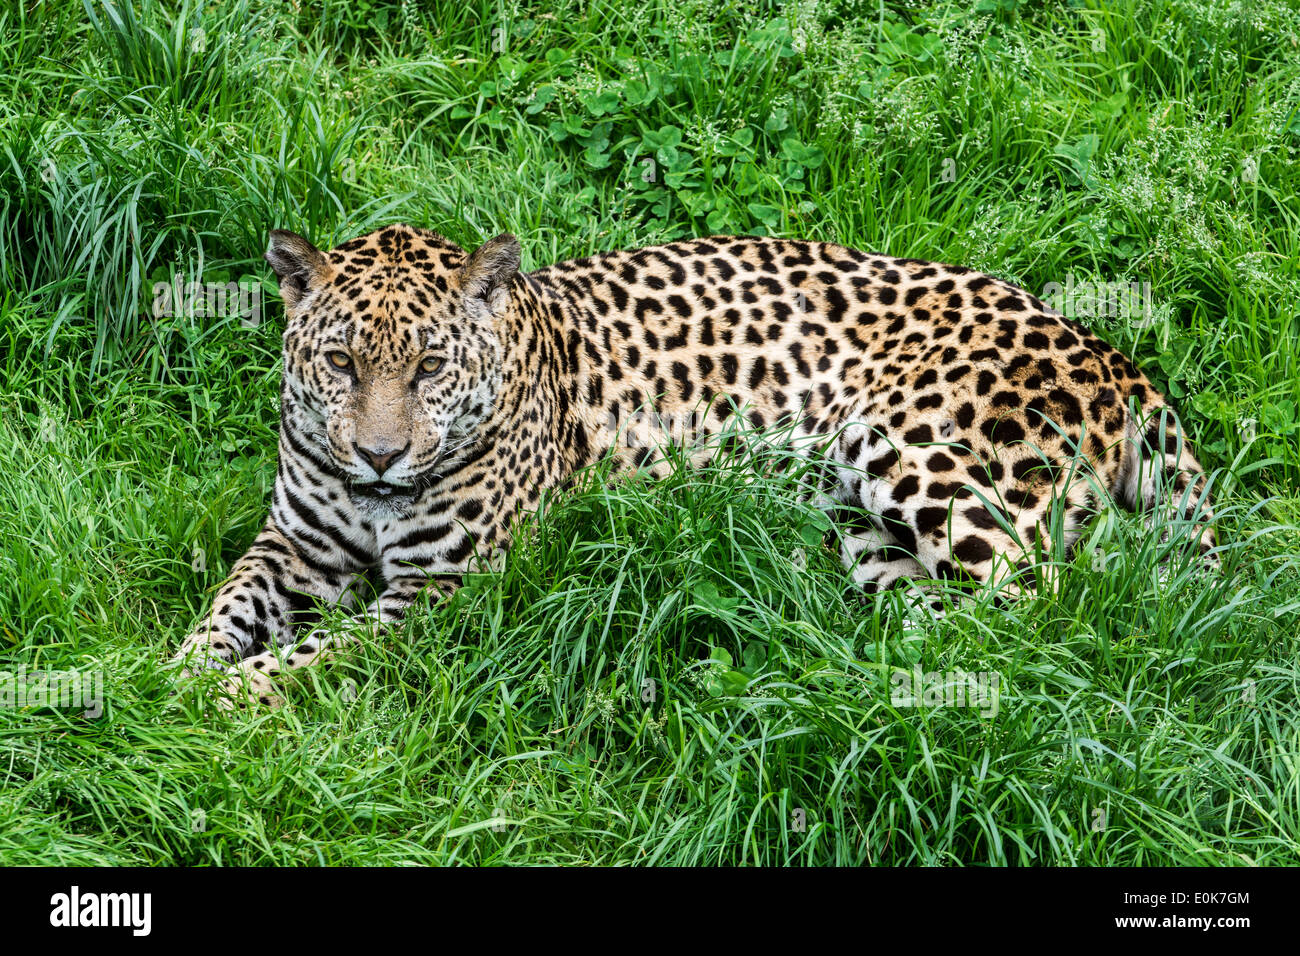 Panther / jaguar (Panthera onca) resting in the grass, native to Central and South America Stock Photo